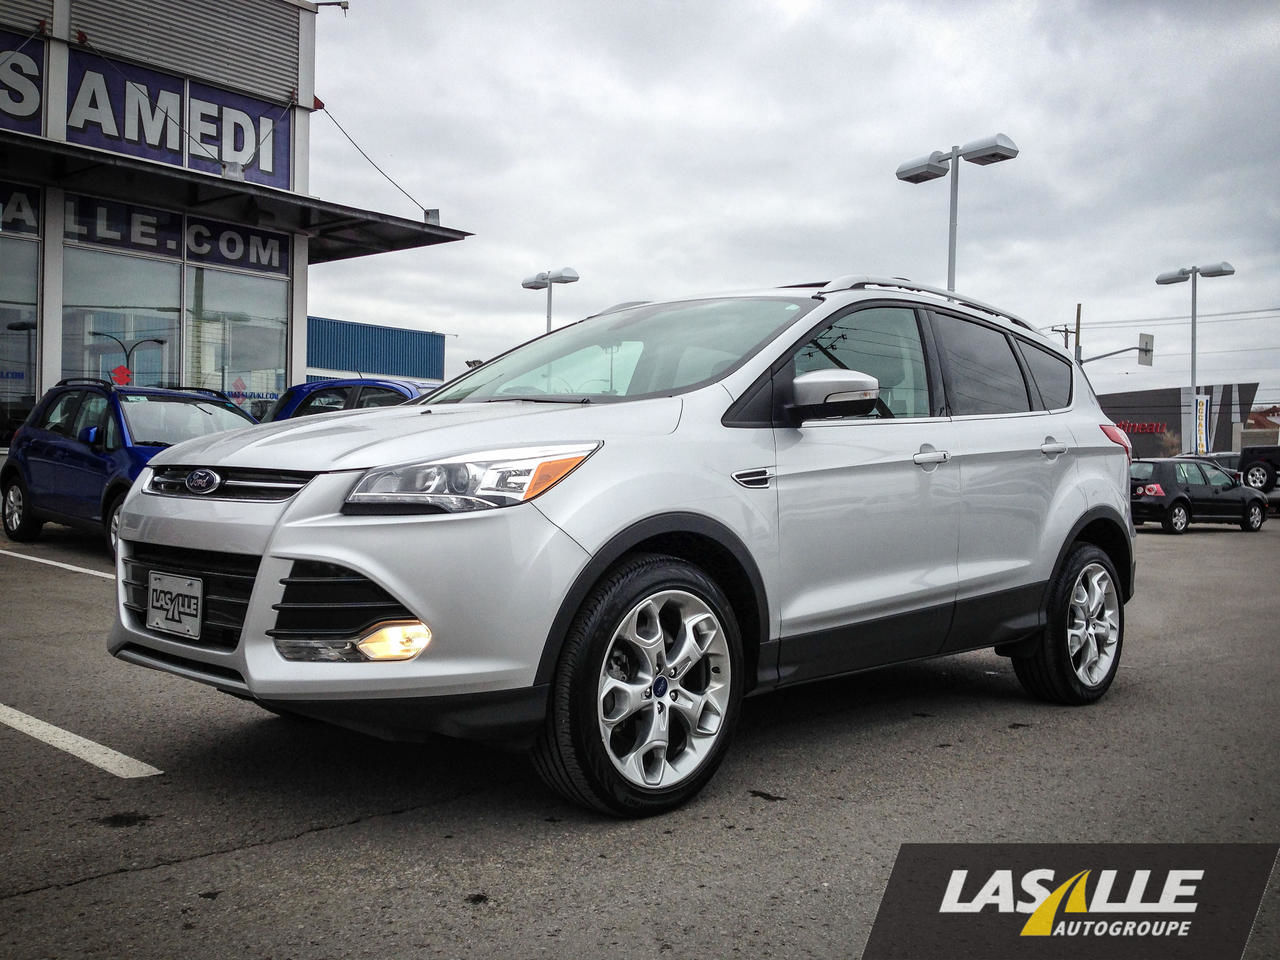 Buy used ford escape montreal #6